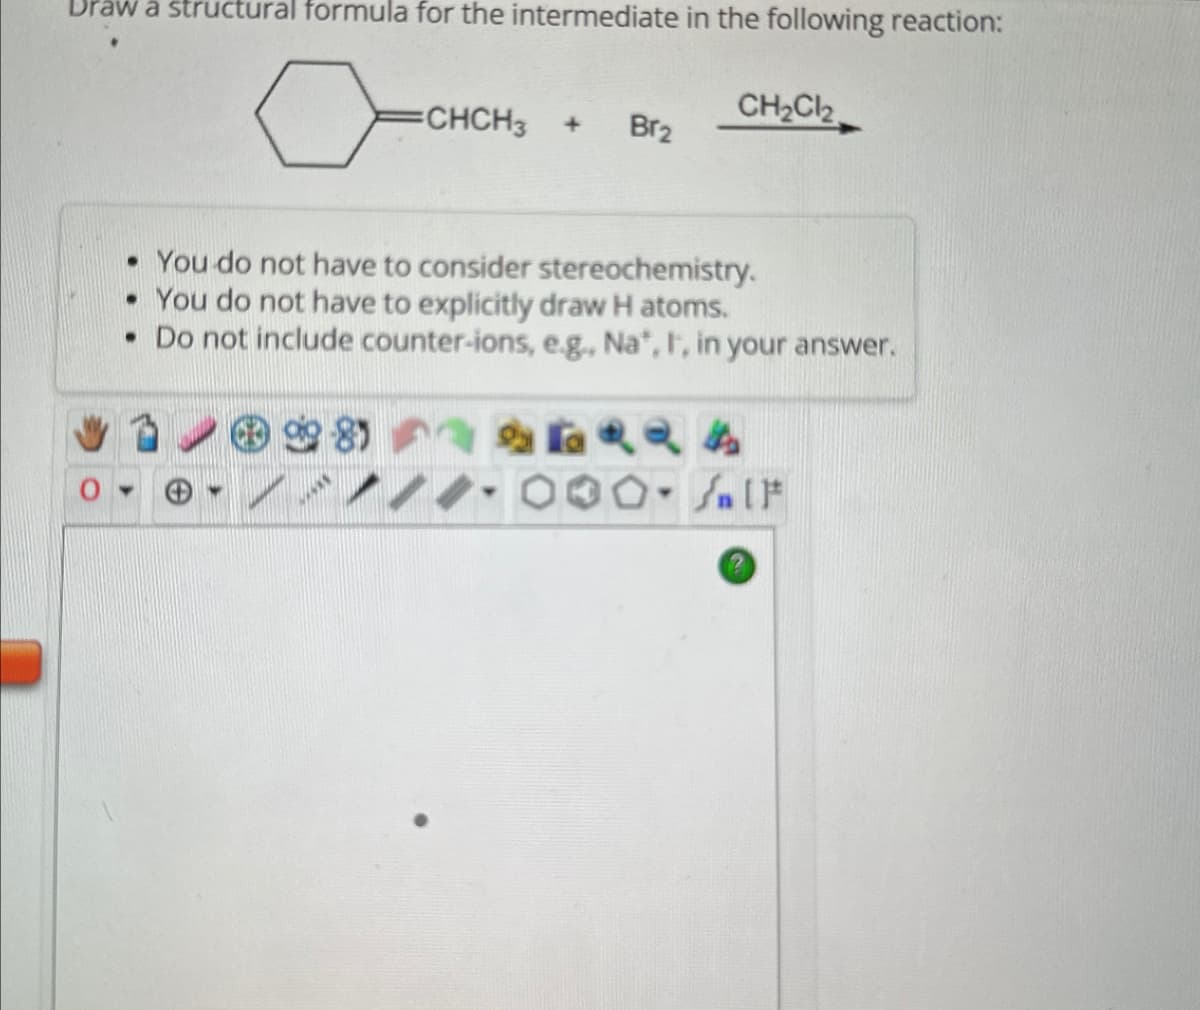 Draw a structural formula for the intermediate in the following reaction:
CHCH3 + Br2
CH2Cl2
• You do not have to consider stereochemistry.
• You do not have to explicitly draw H atoms.
• Do not include counter-ions, e.g., Na*, I, in your answer.
8
4444
Salt